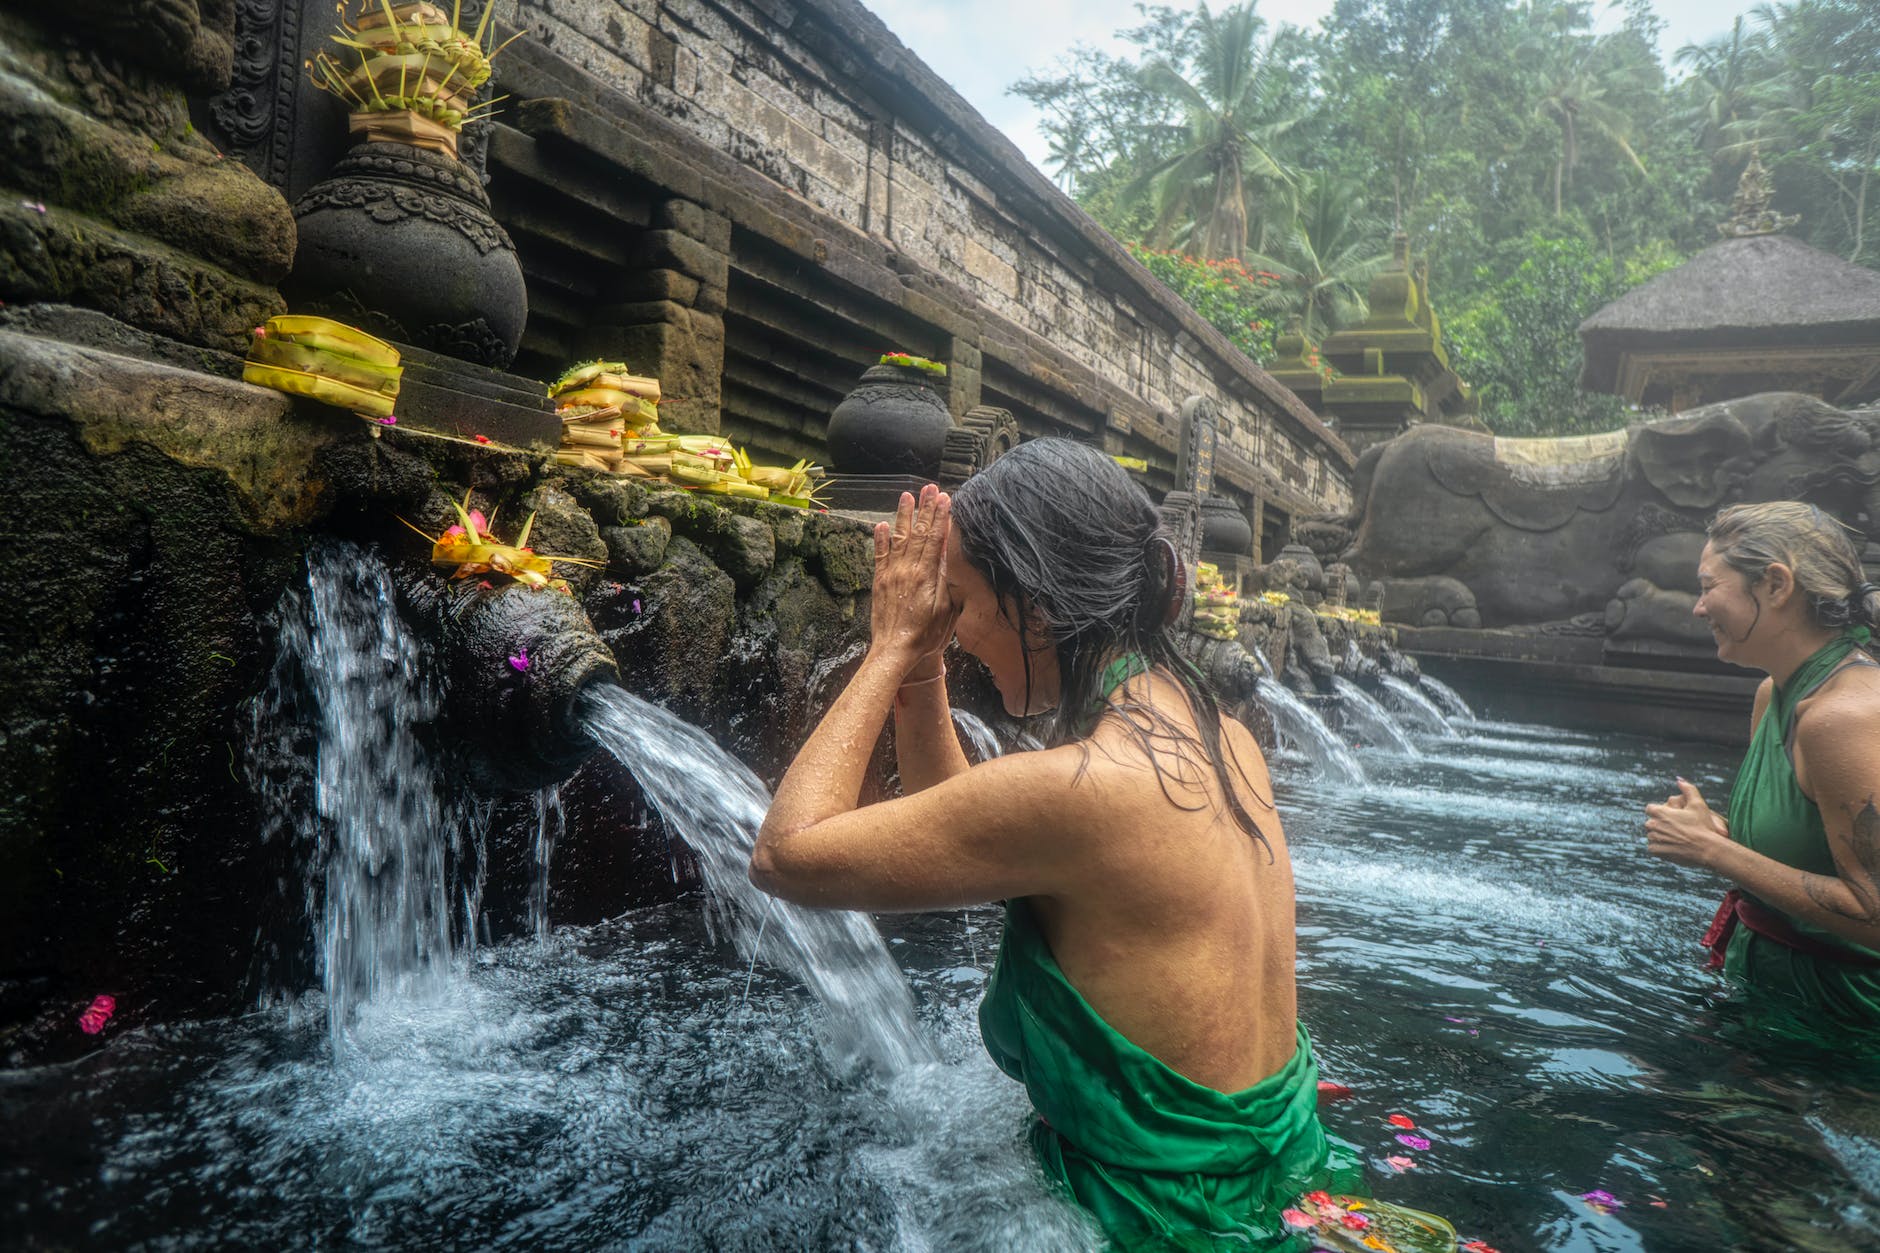 women at a spiritual temple praying and cleansing in sacred waterfall pond of temple in jungle. 